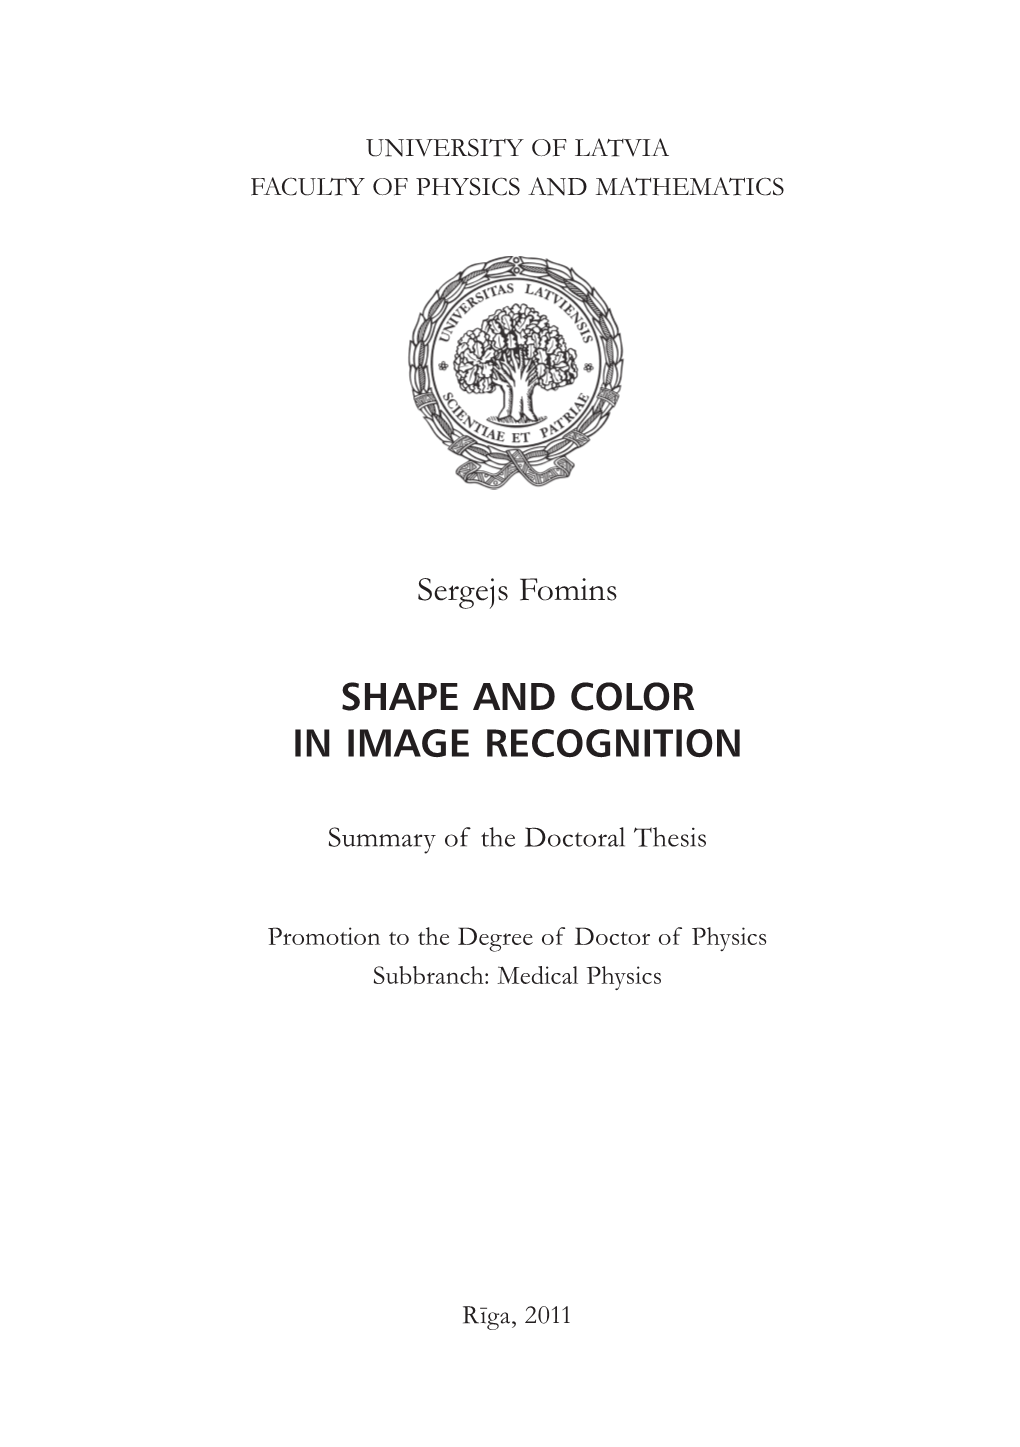 Shape and Color in Image Recognition